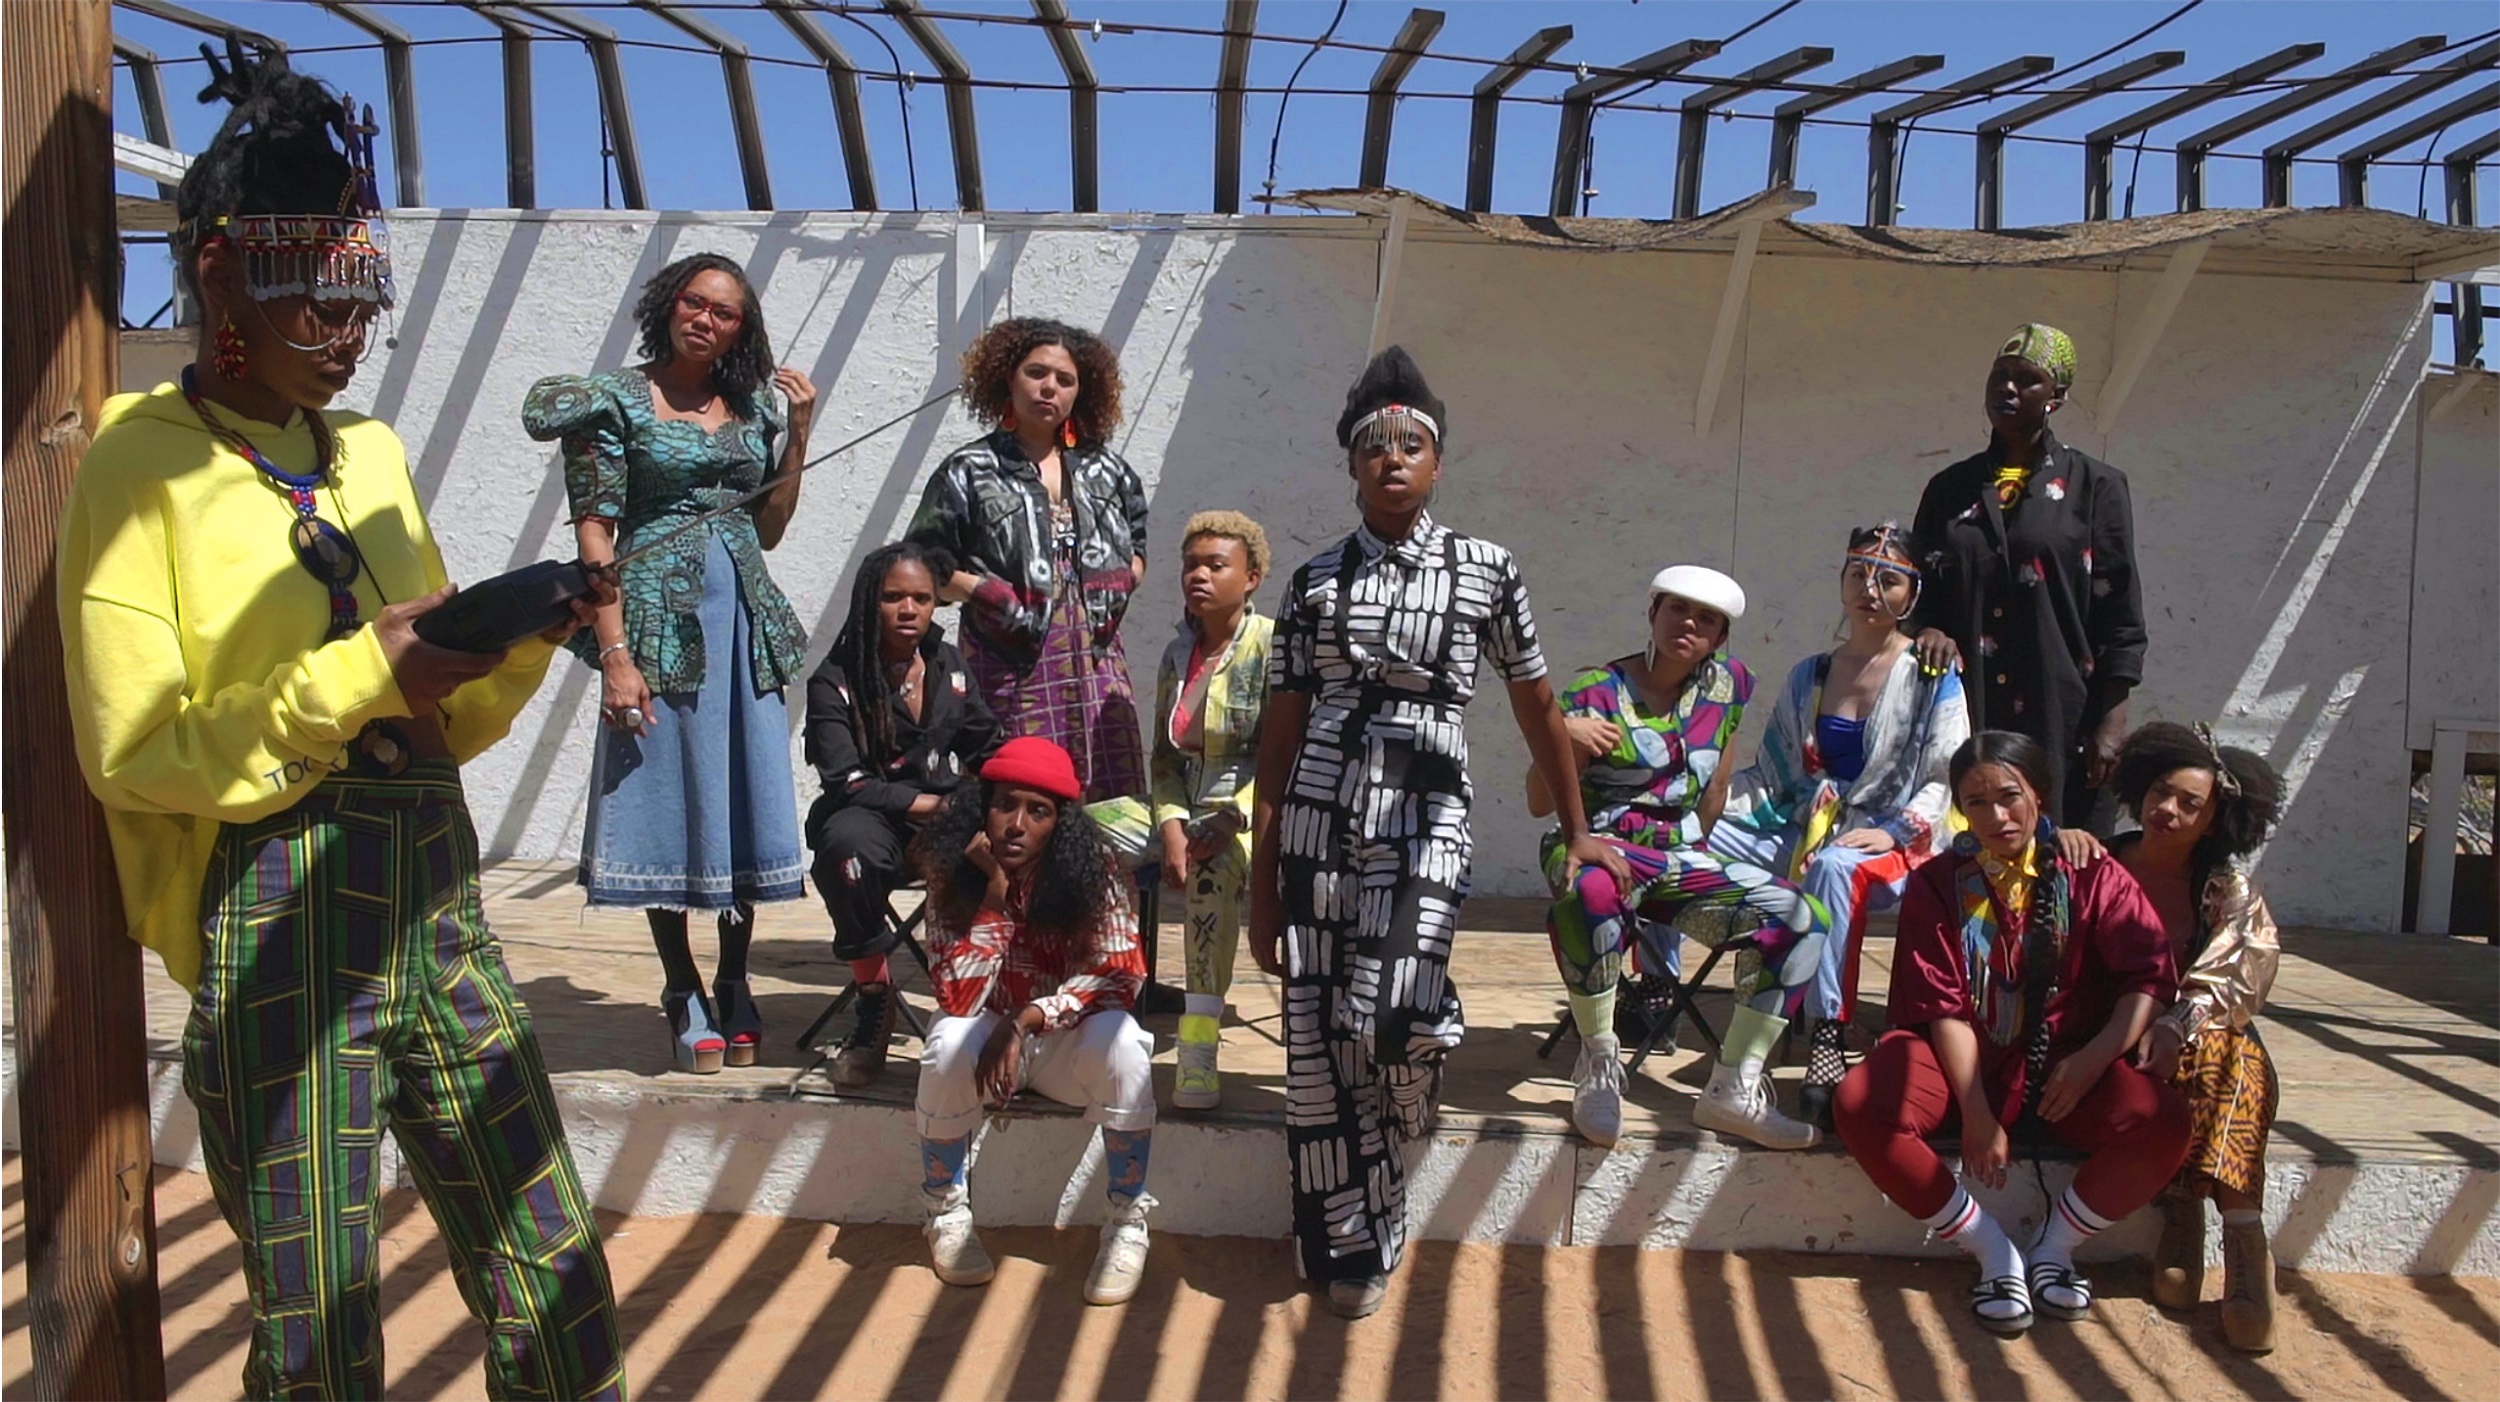 Color photograph of twelve young Black people in colorful clothing gathered outdoors under a pergola